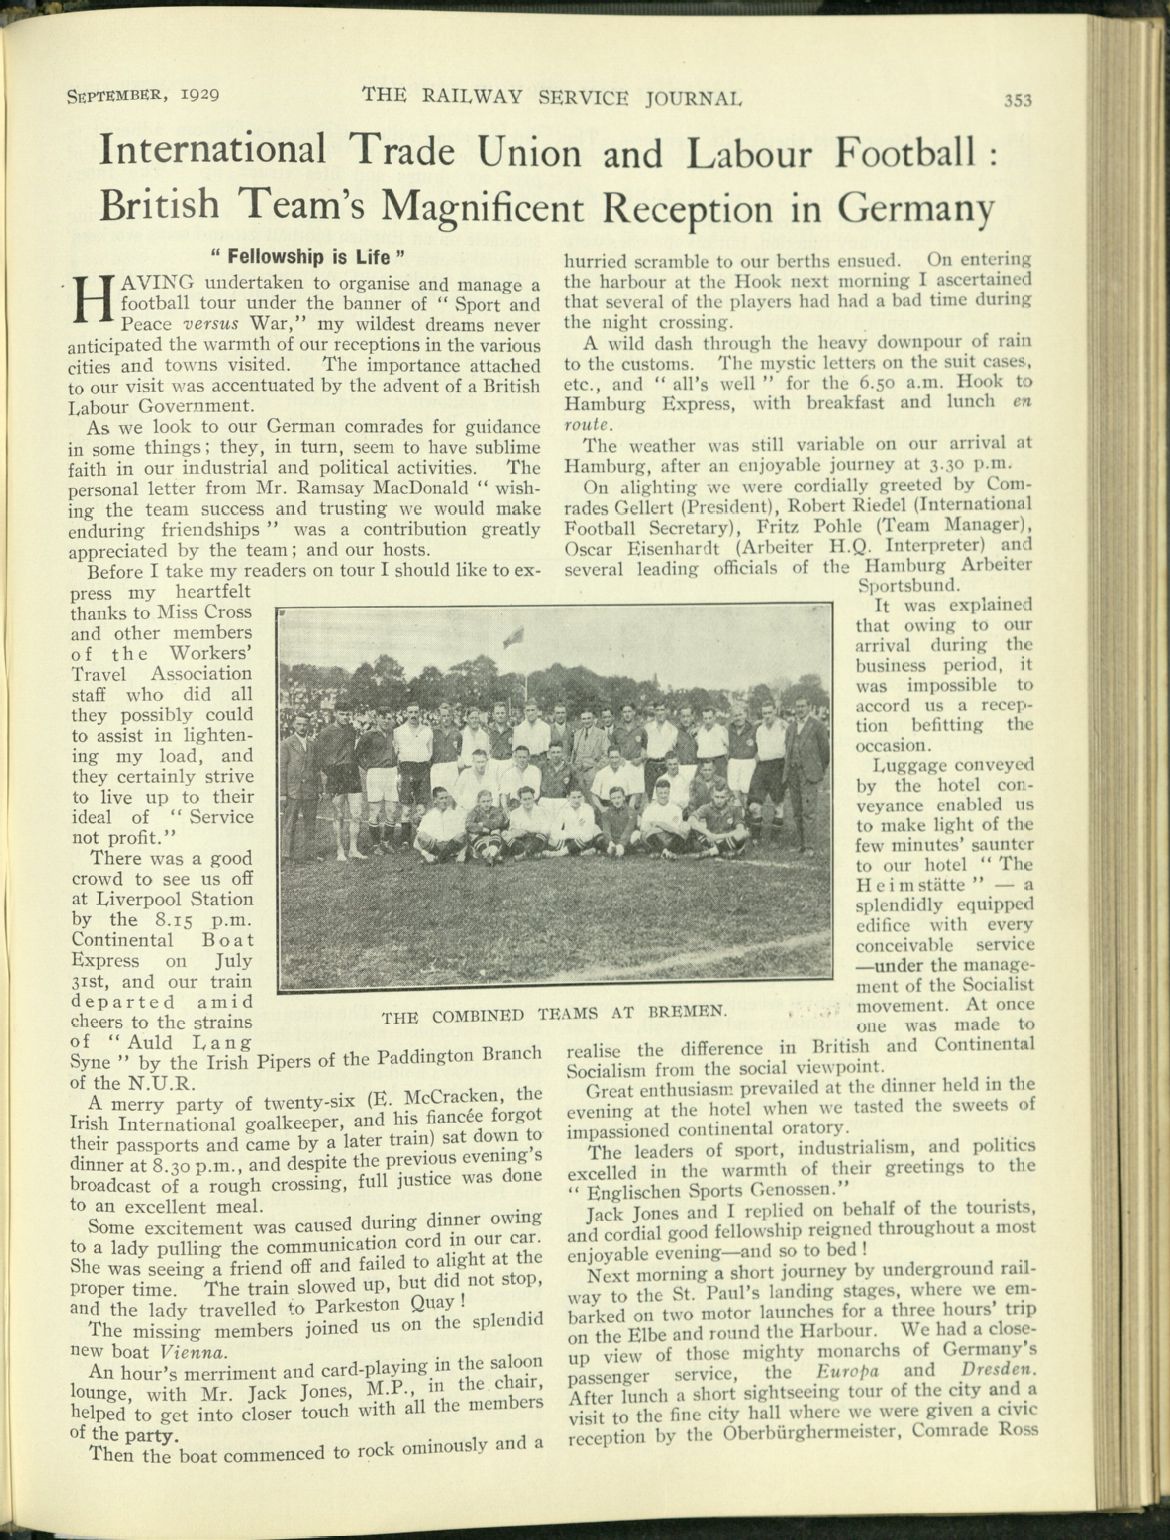 Article on football tour of Germany, 1929